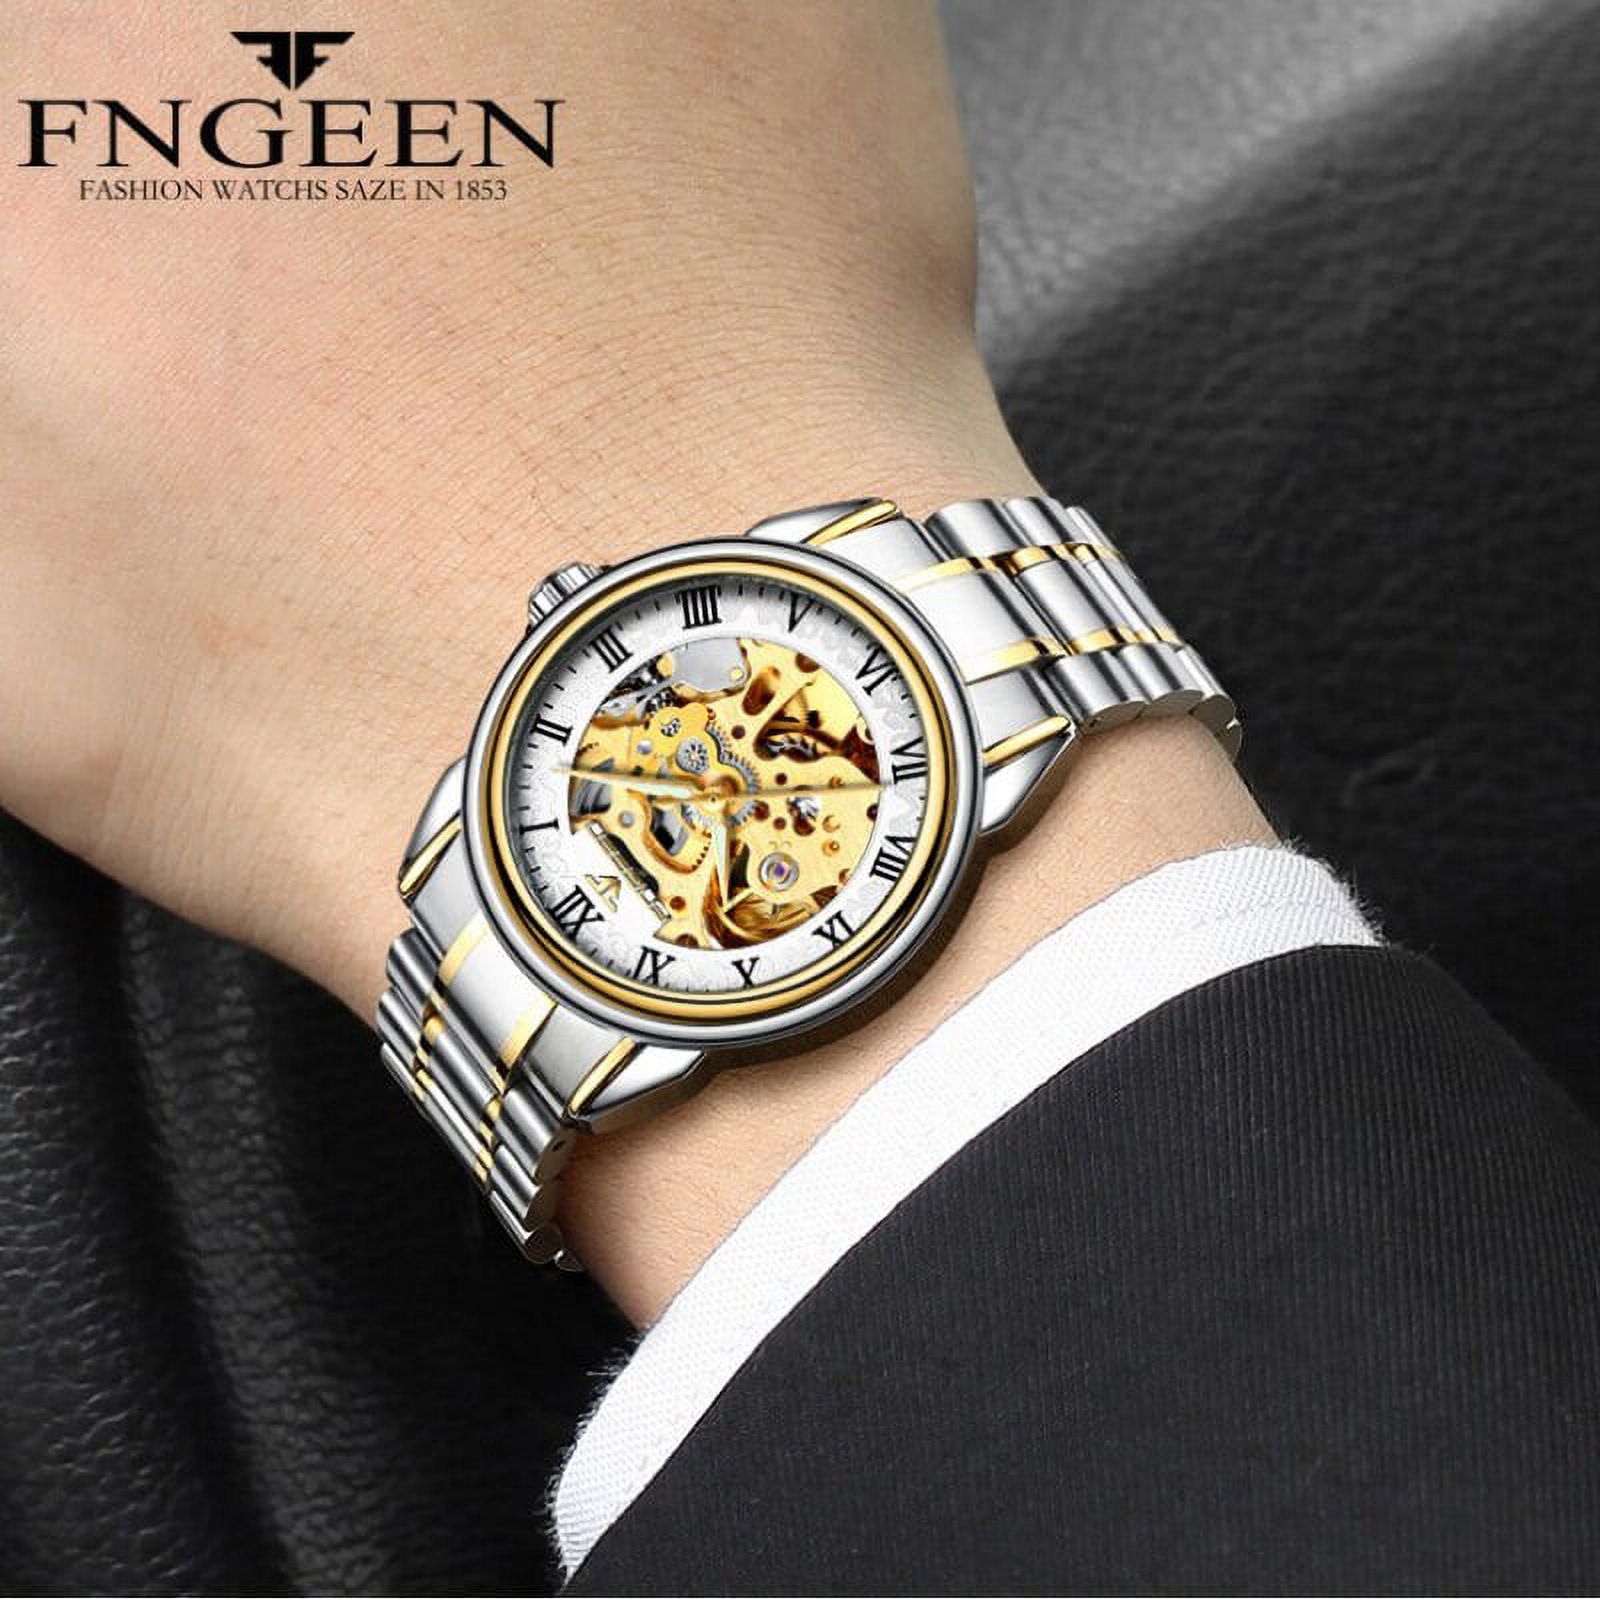 Fngeen Brand Men's Watch Waterproof Fashion Student Men's Watch Double-Sided Hollow Automatic Mechanical Watch - image 5 of 6